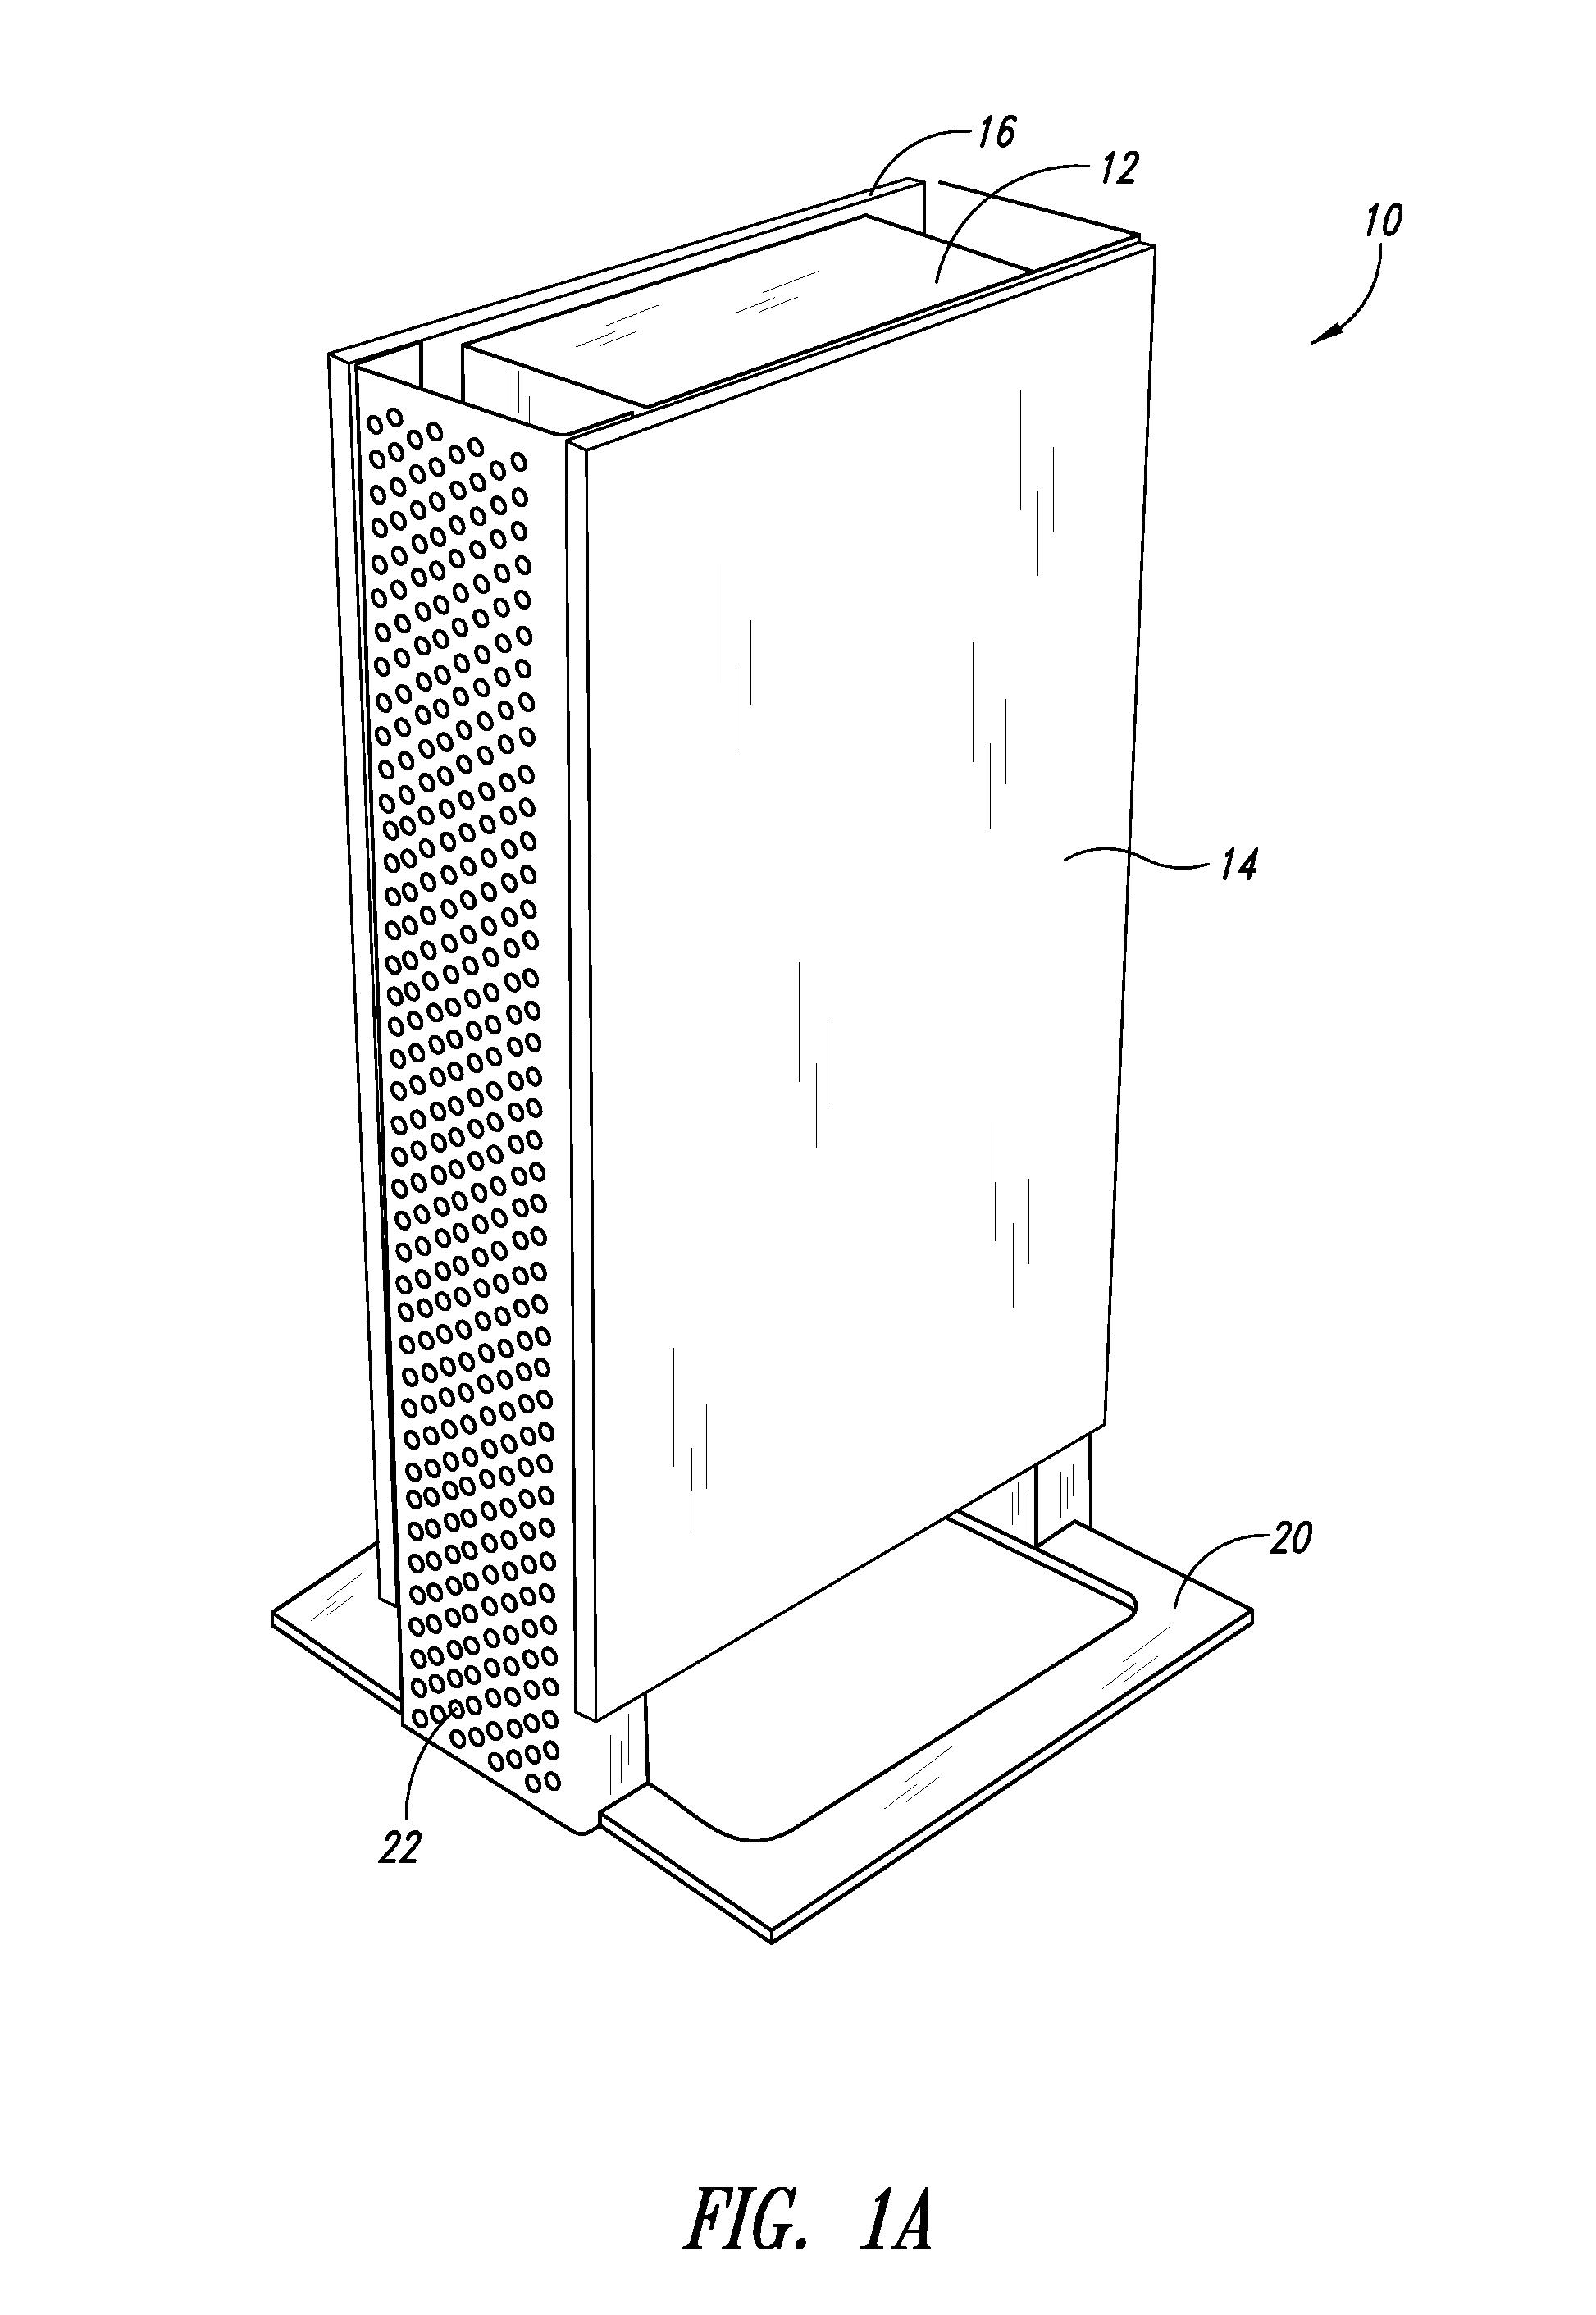 Systems, devices, and methods for biomass production